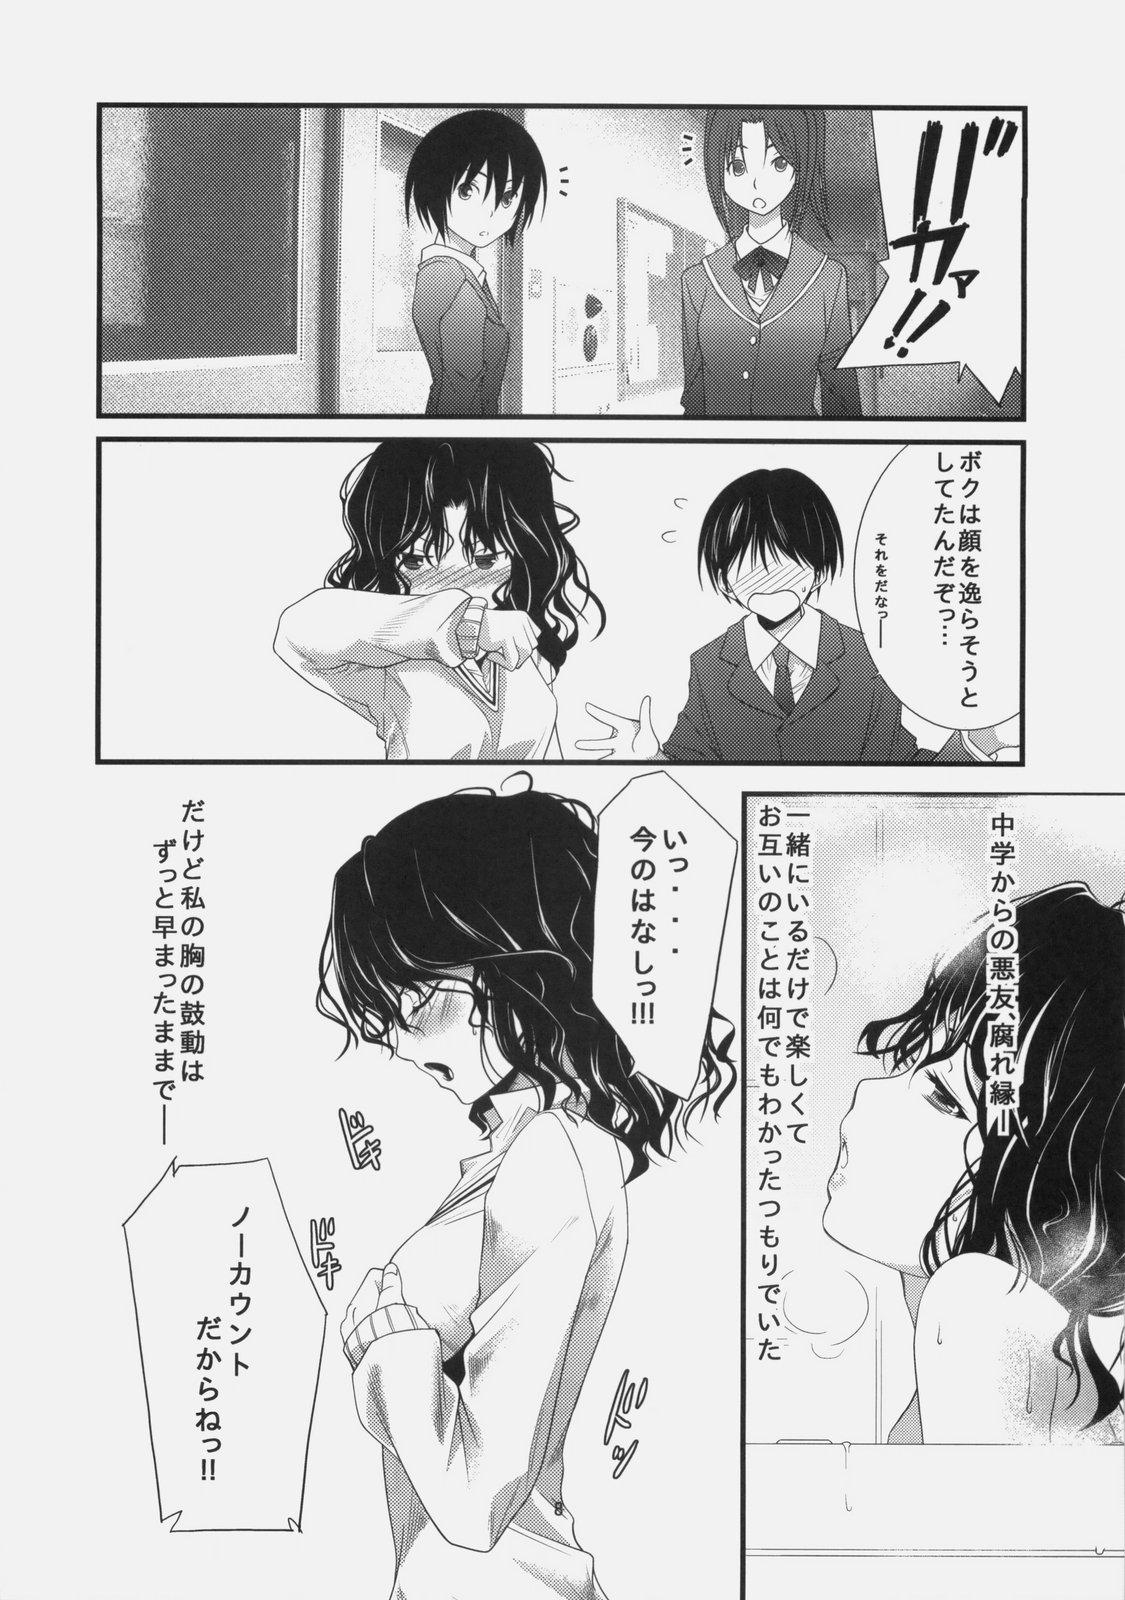 Sucking Cocks Yesterday & Today - Amagami Big Pussy - Page 7